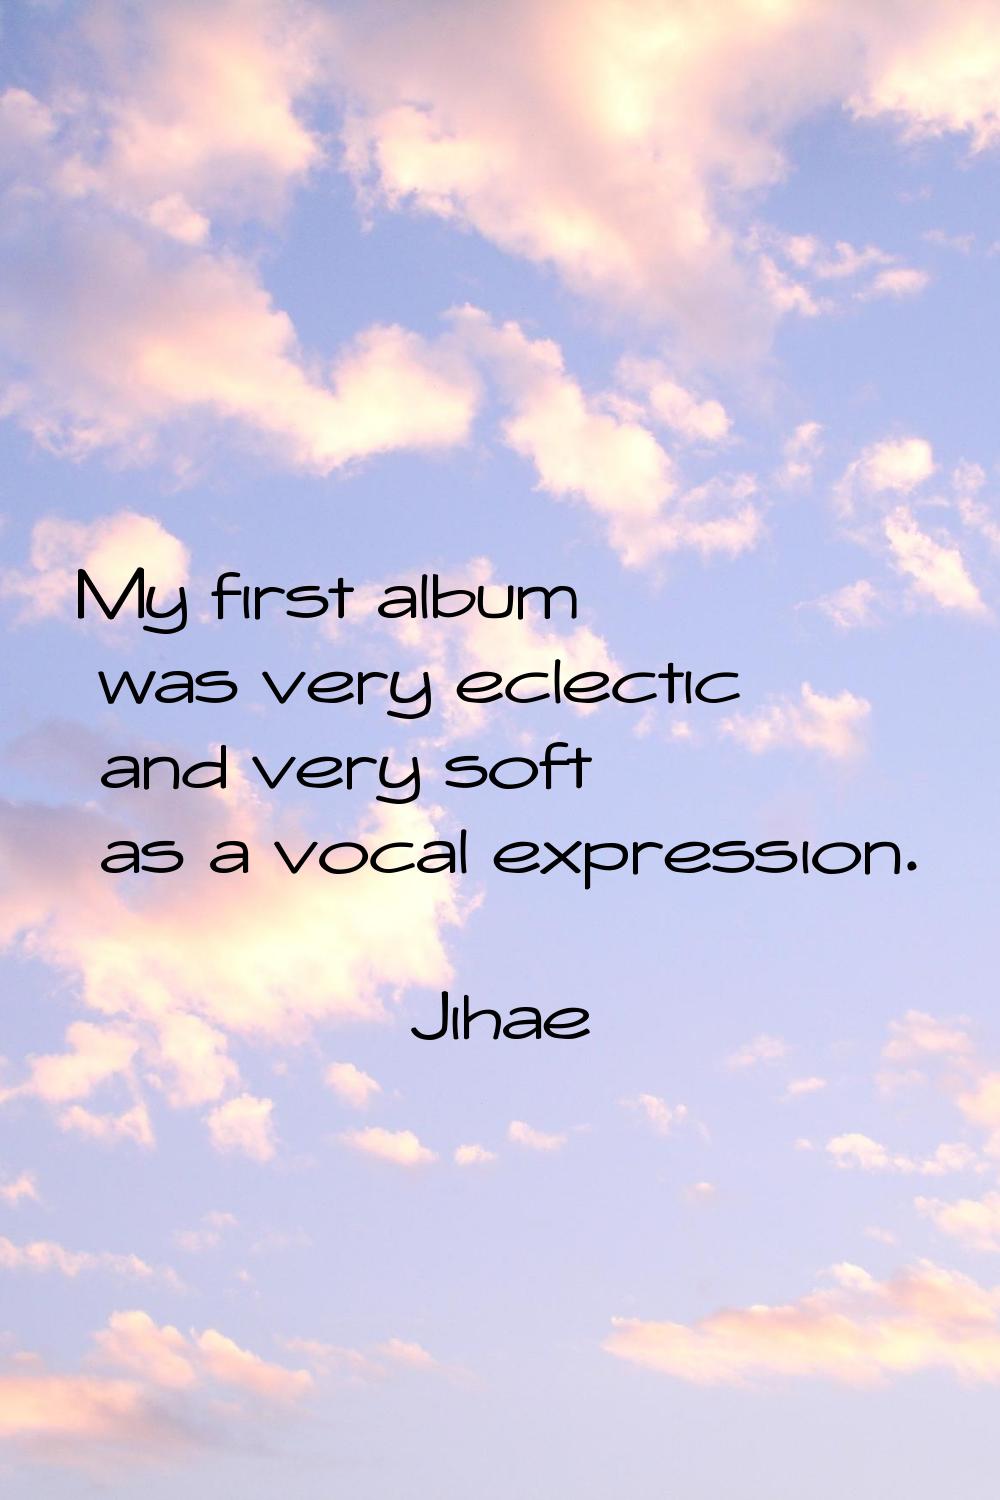 My first album was very eclectic and very soft as a vocal expression.